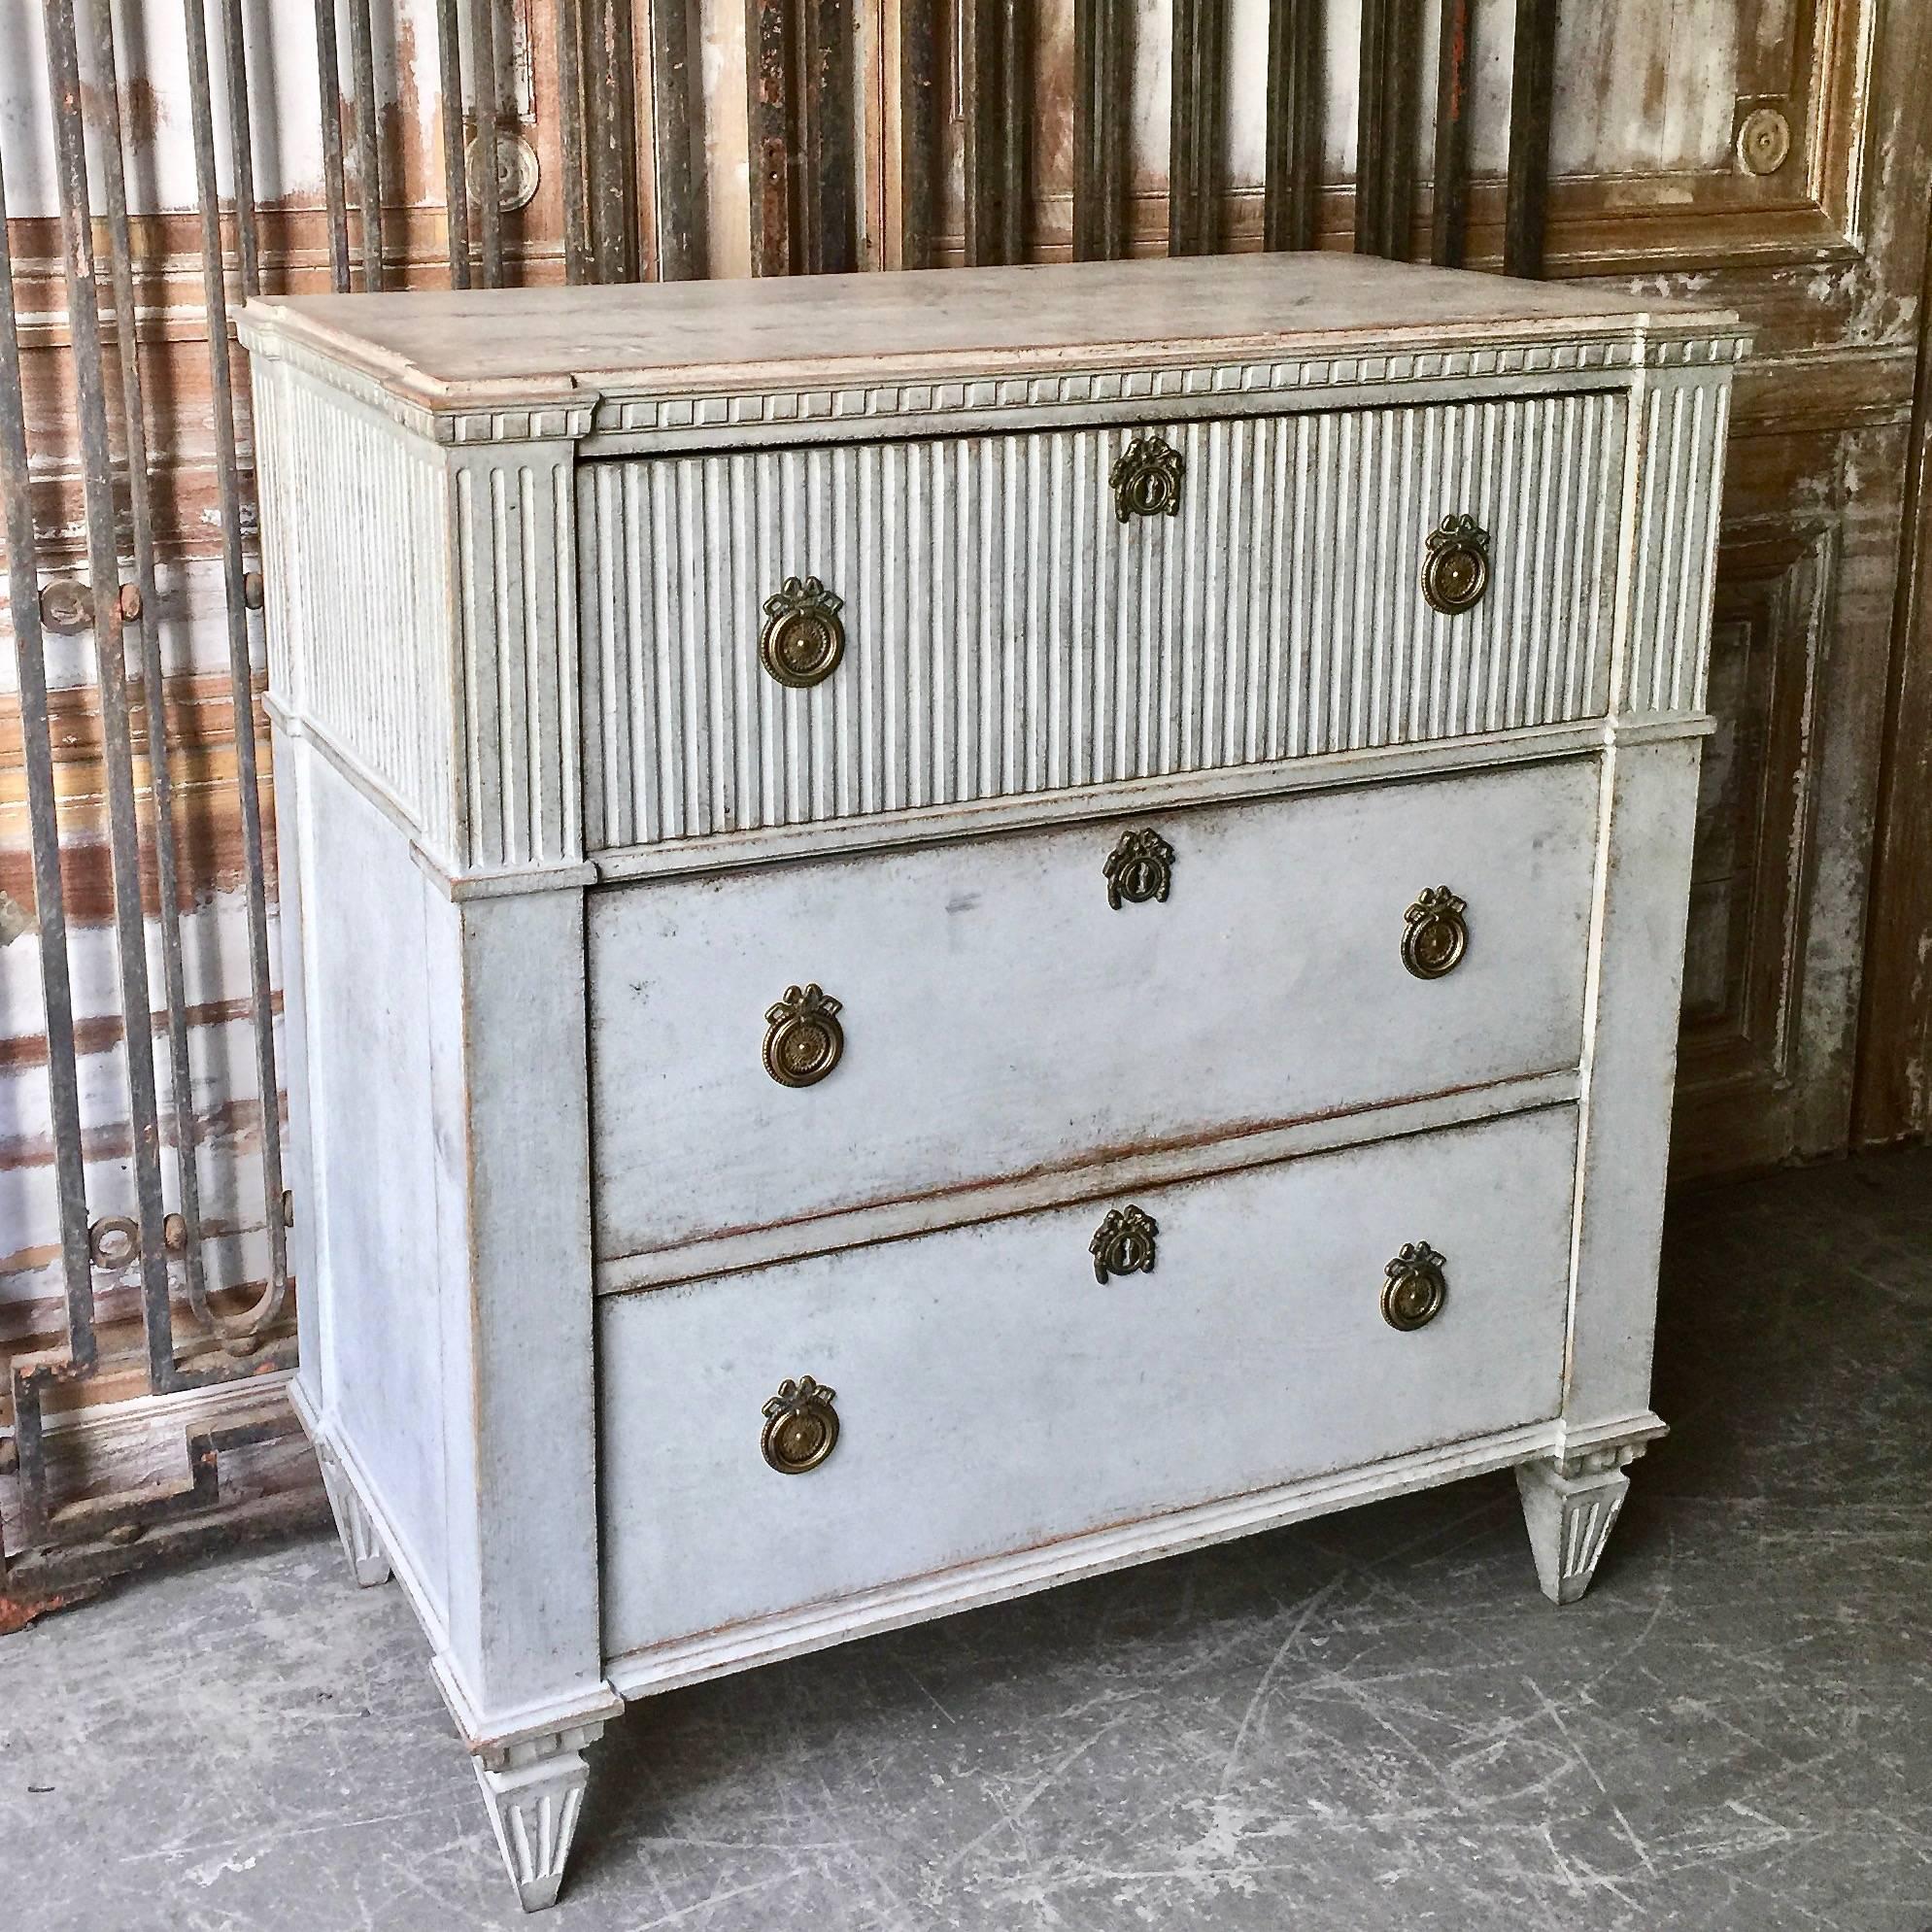 Late Gustavian period chest of drawers with fluting on front of the upper drawer and on around the side panels. Shaped top with dental trim under, reeded canted corners and classical feet. Very classical Swedish piece with original charming